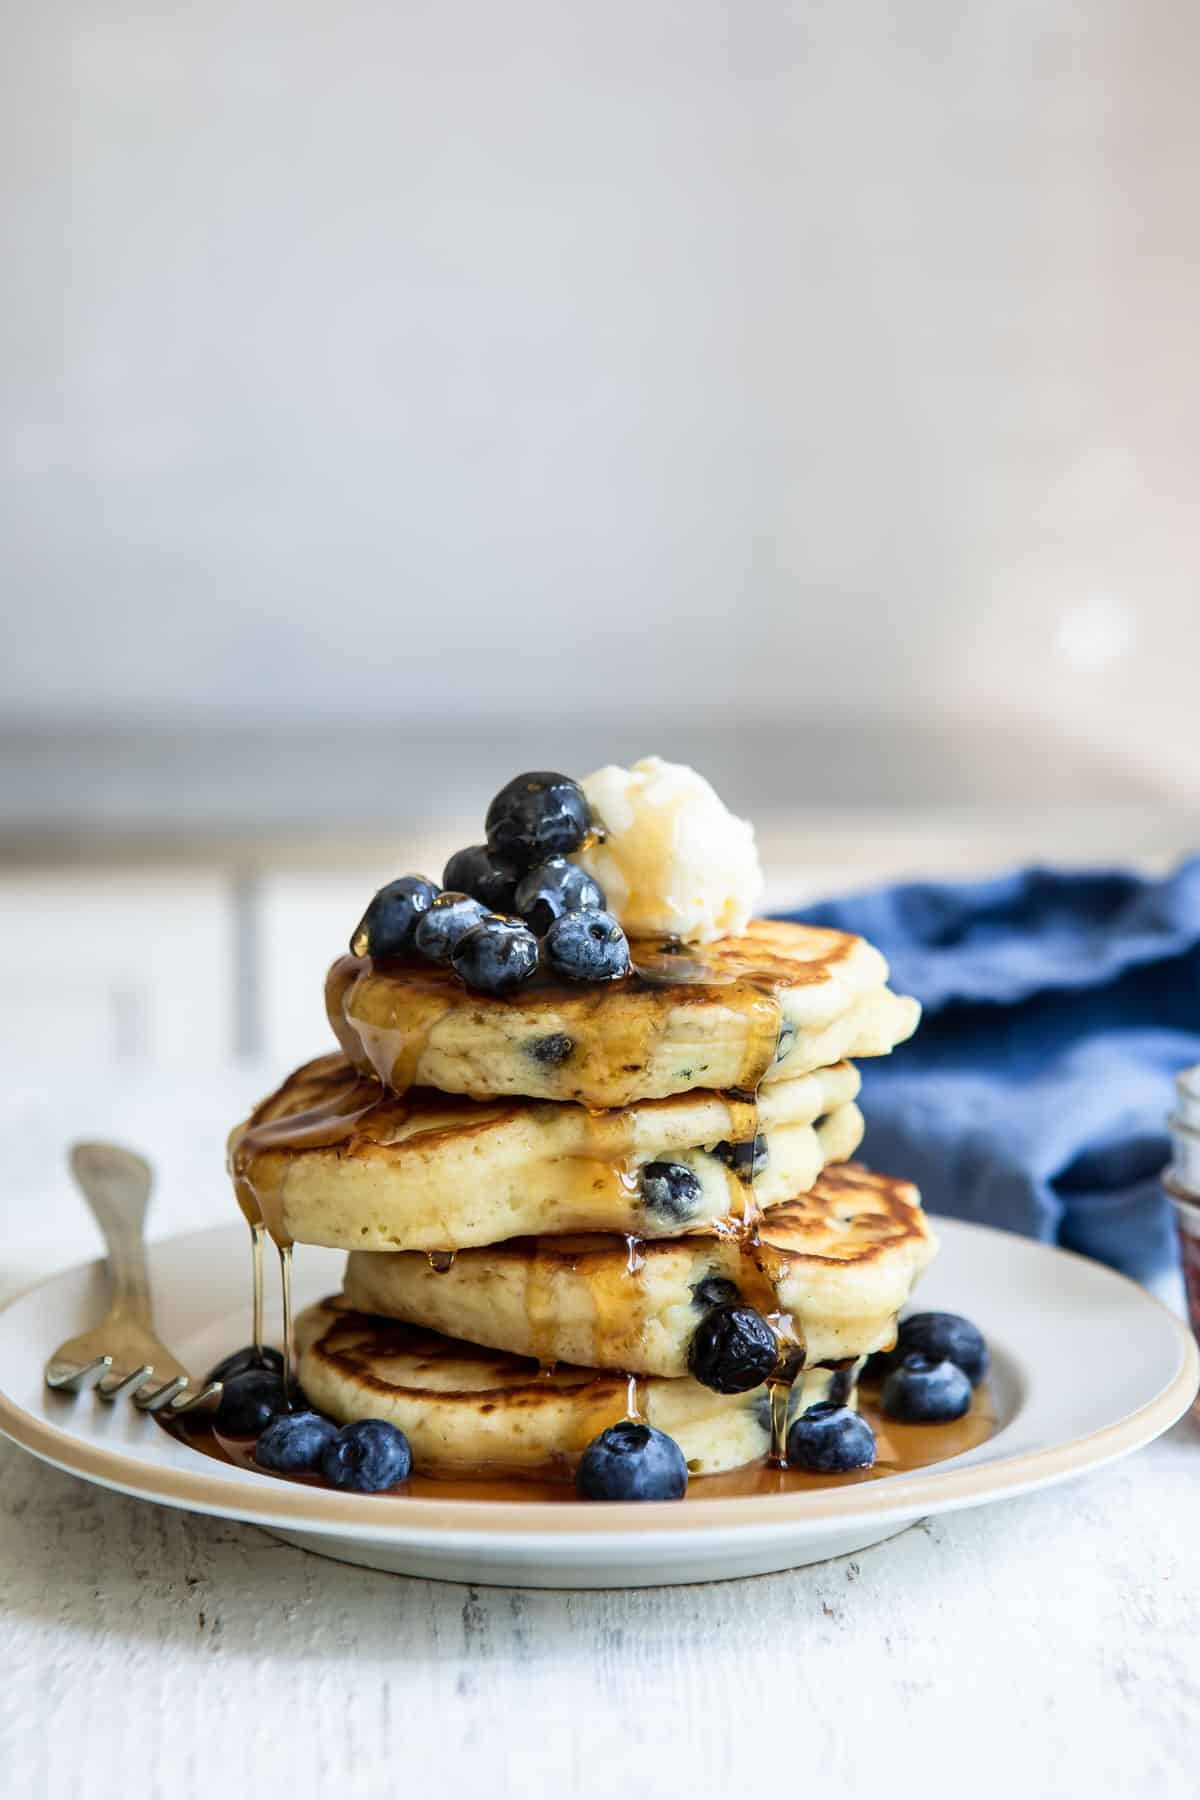 A stack of blueberry pancakes on a plate.